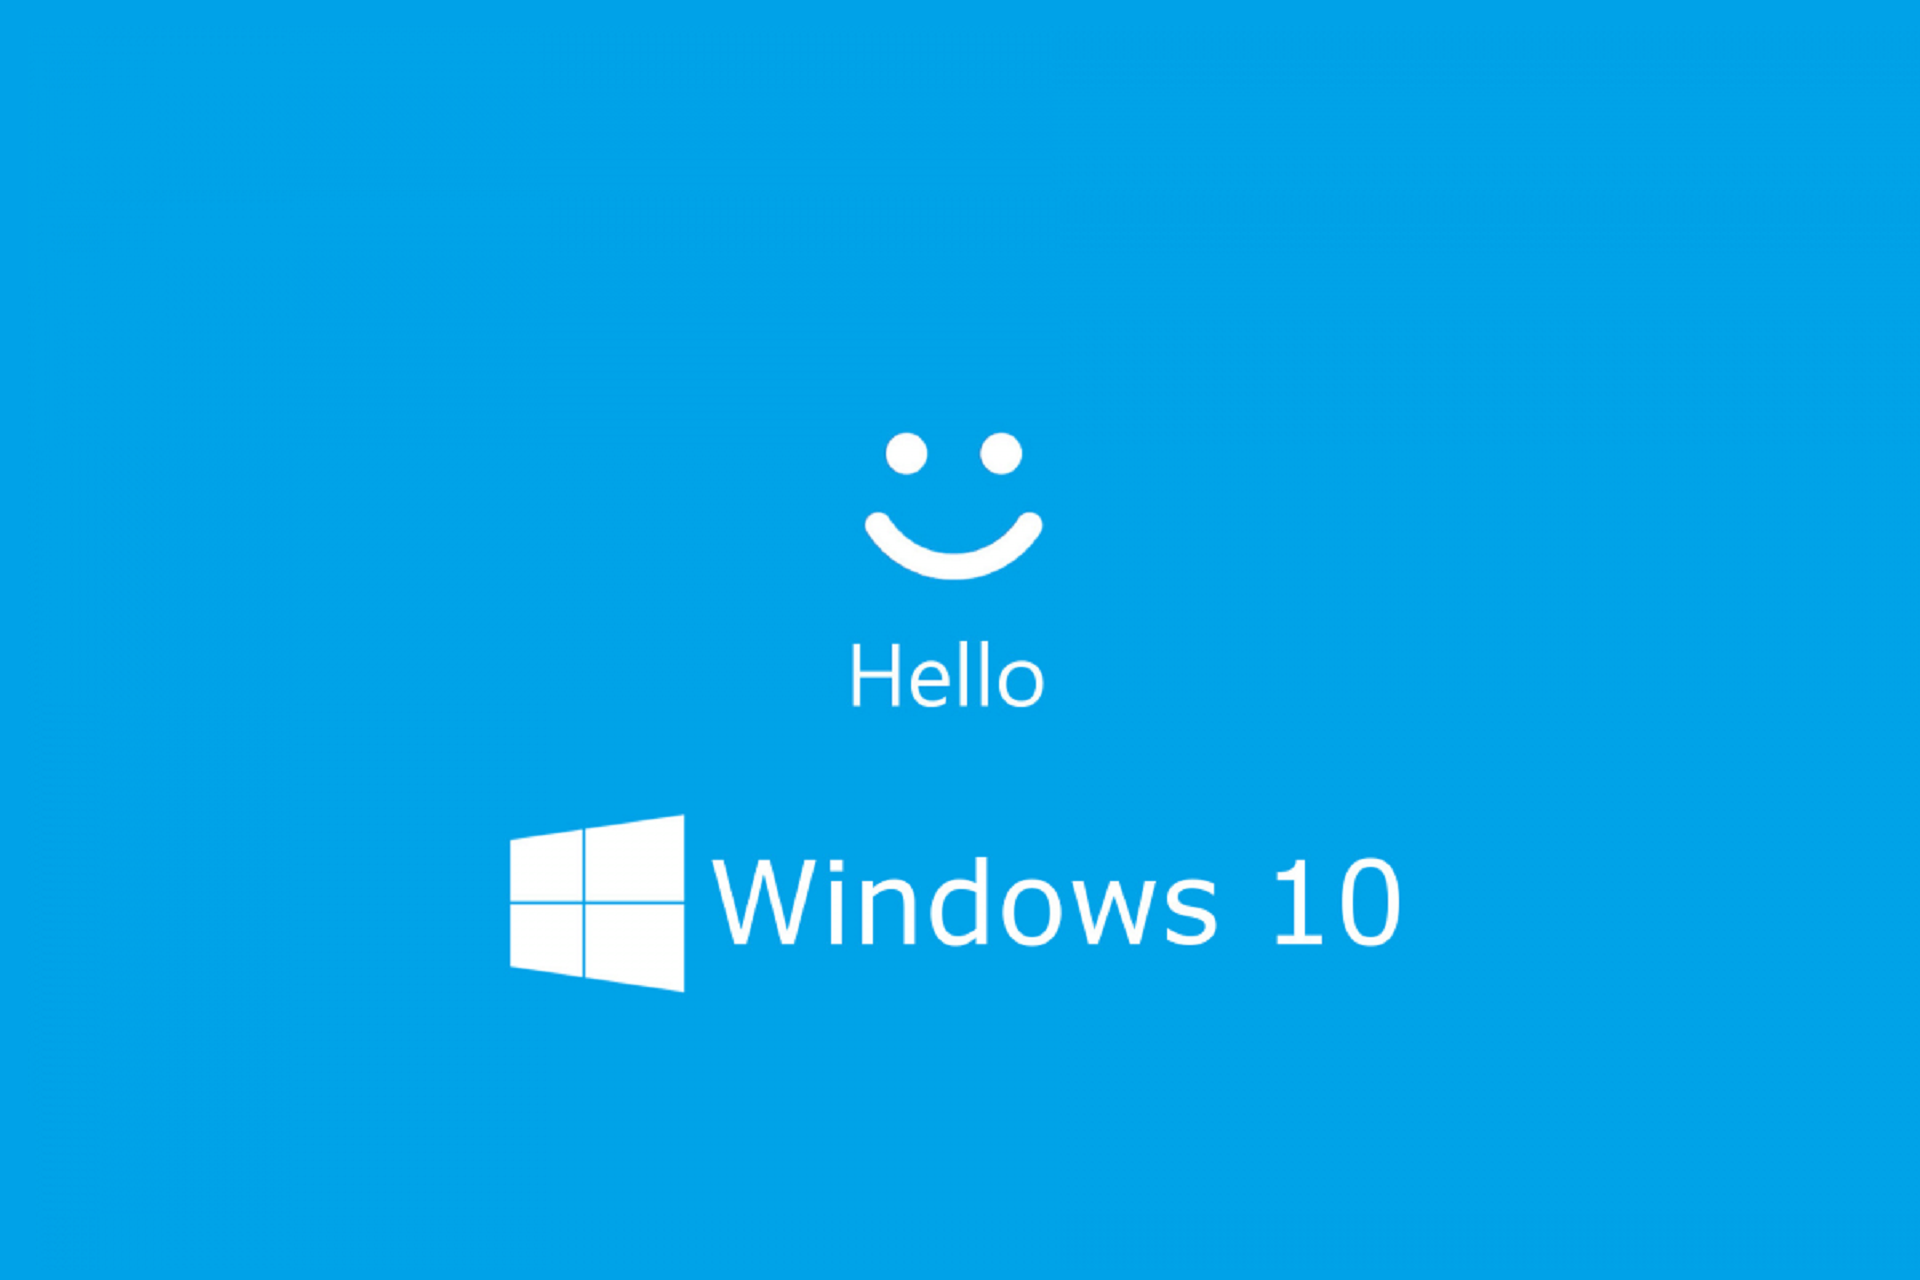 windows hello stopped working after update